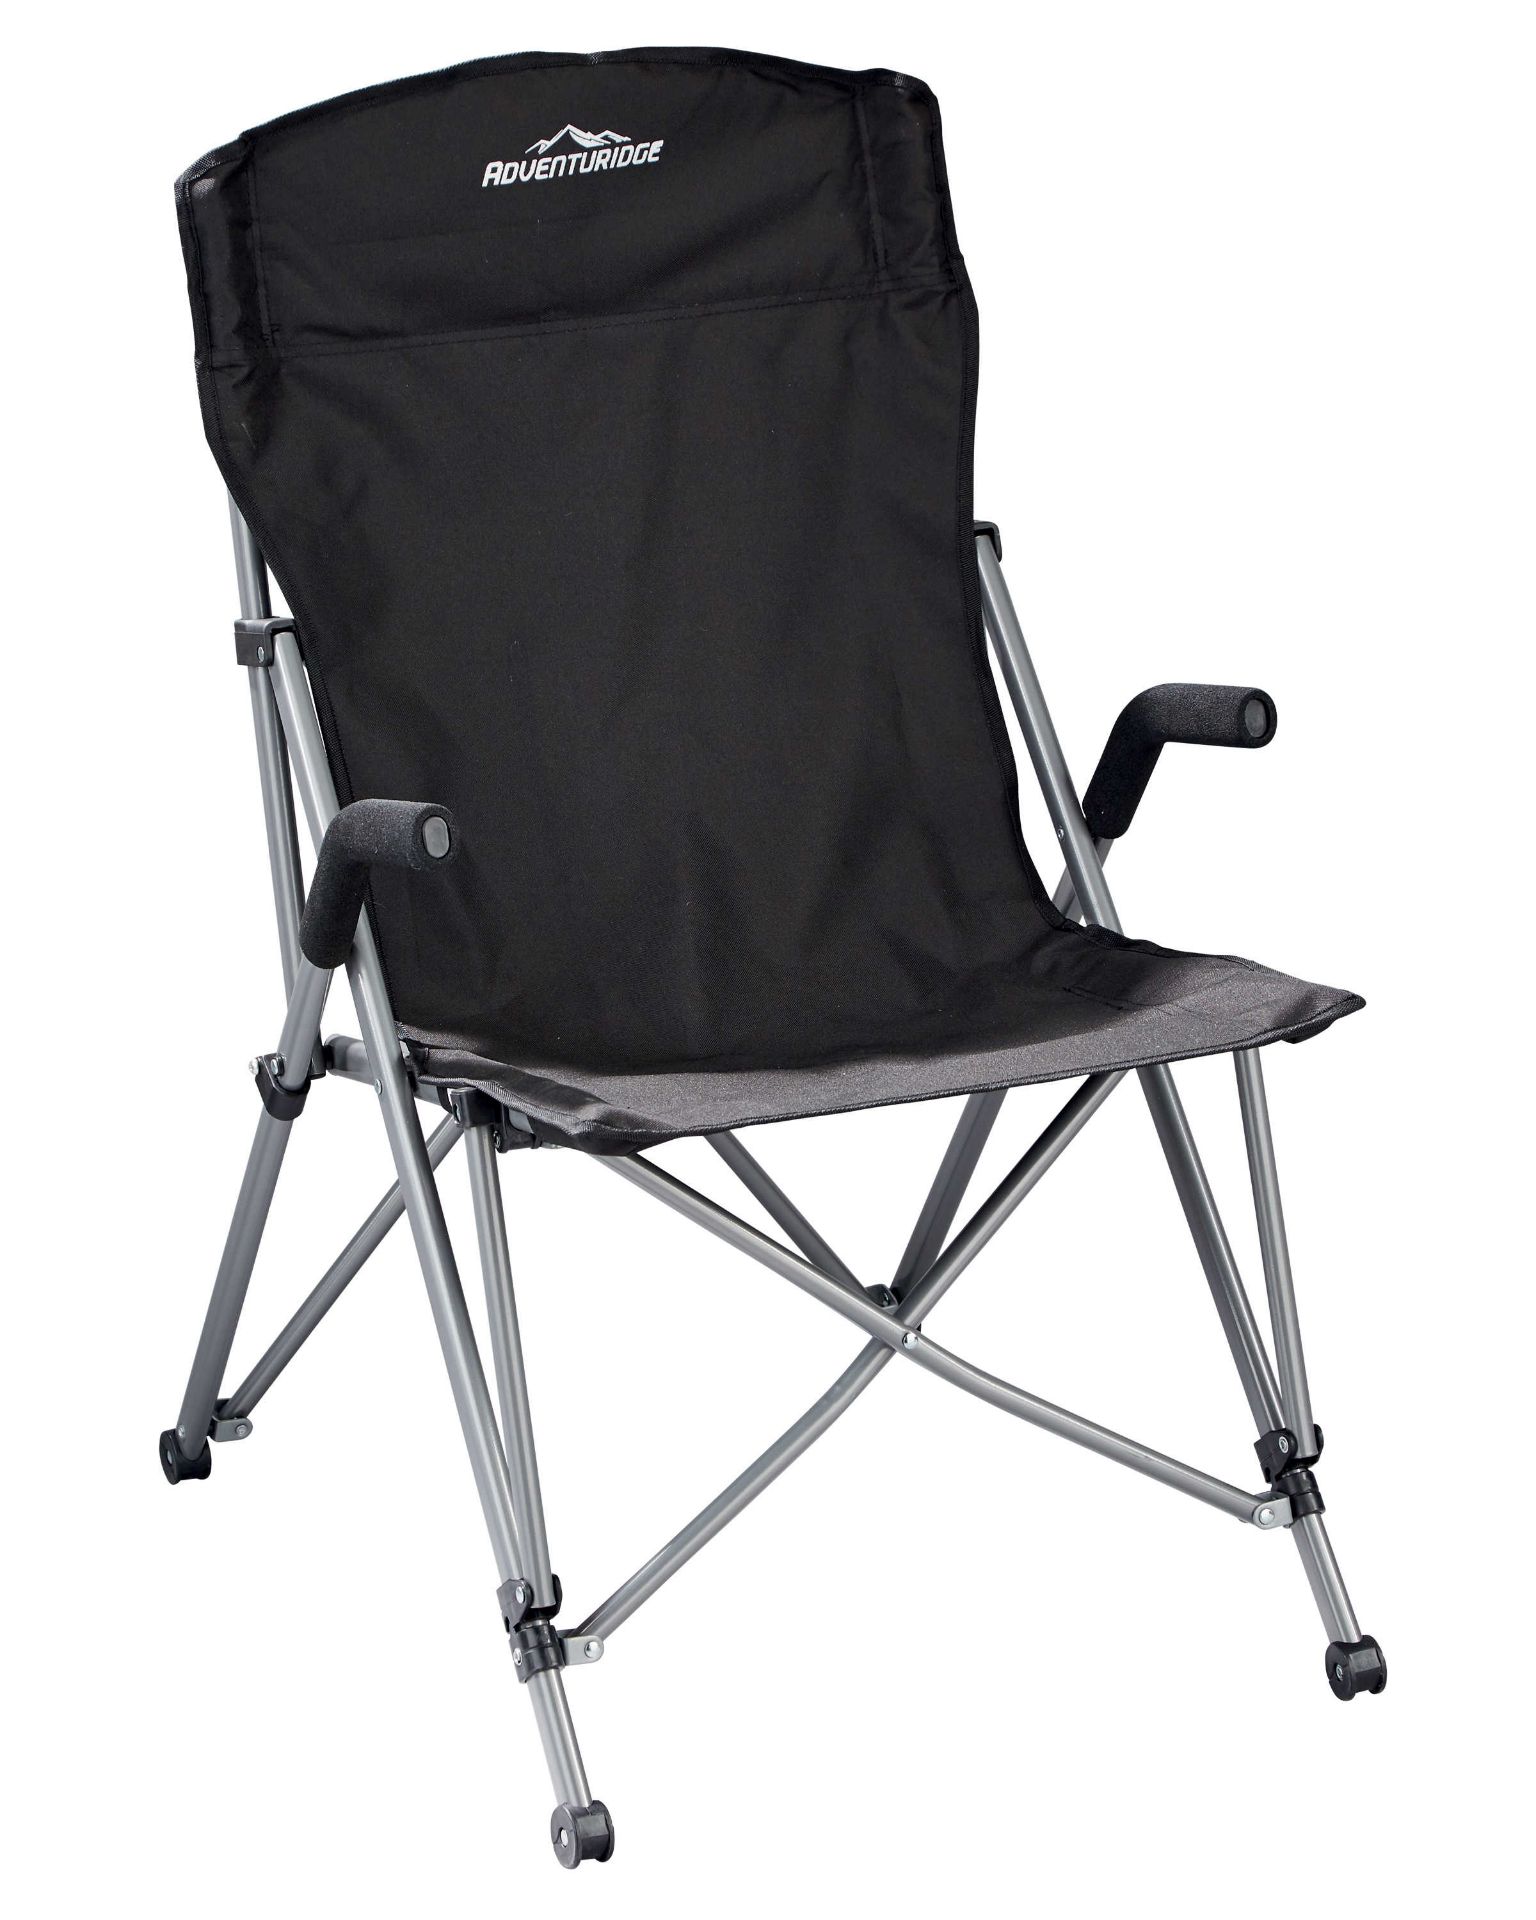 V Brand New Tourer/Expedition Chair In Silver/Black With Carry Case - Lightweight Steel Frame So - Image 2 of 2